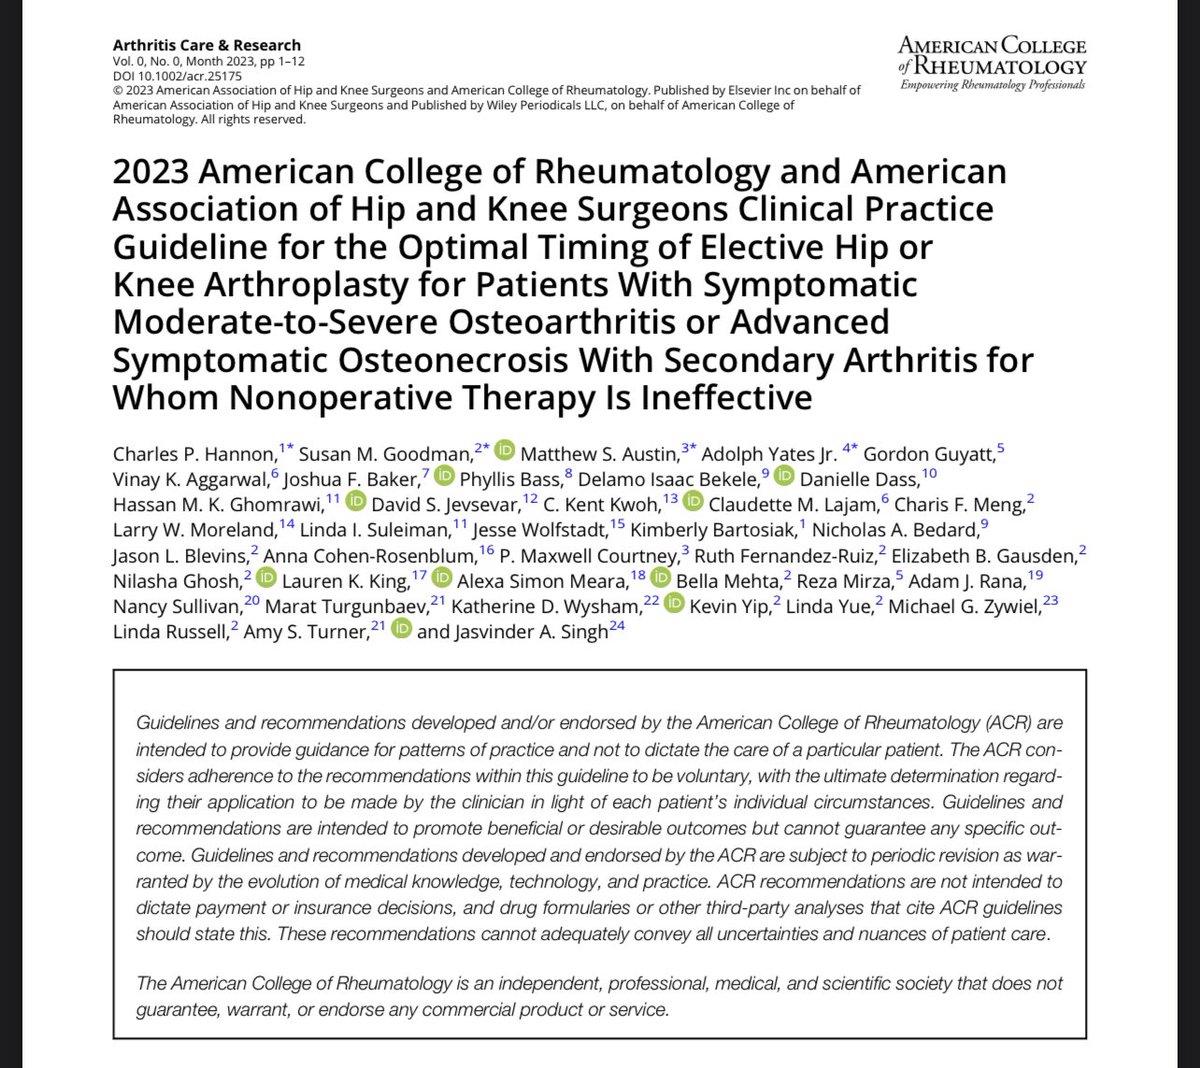 🚨🚨🚨Proud to have worked with some of the best and brightest @AAHKS and @ACRheum for the newest 2023 Guidelines for the Optimal Timing of elective #Hip and #Knee Arthroplasty! I am encouraged by these guidelines that we can improve #equity in total hip and knee arthroplasty